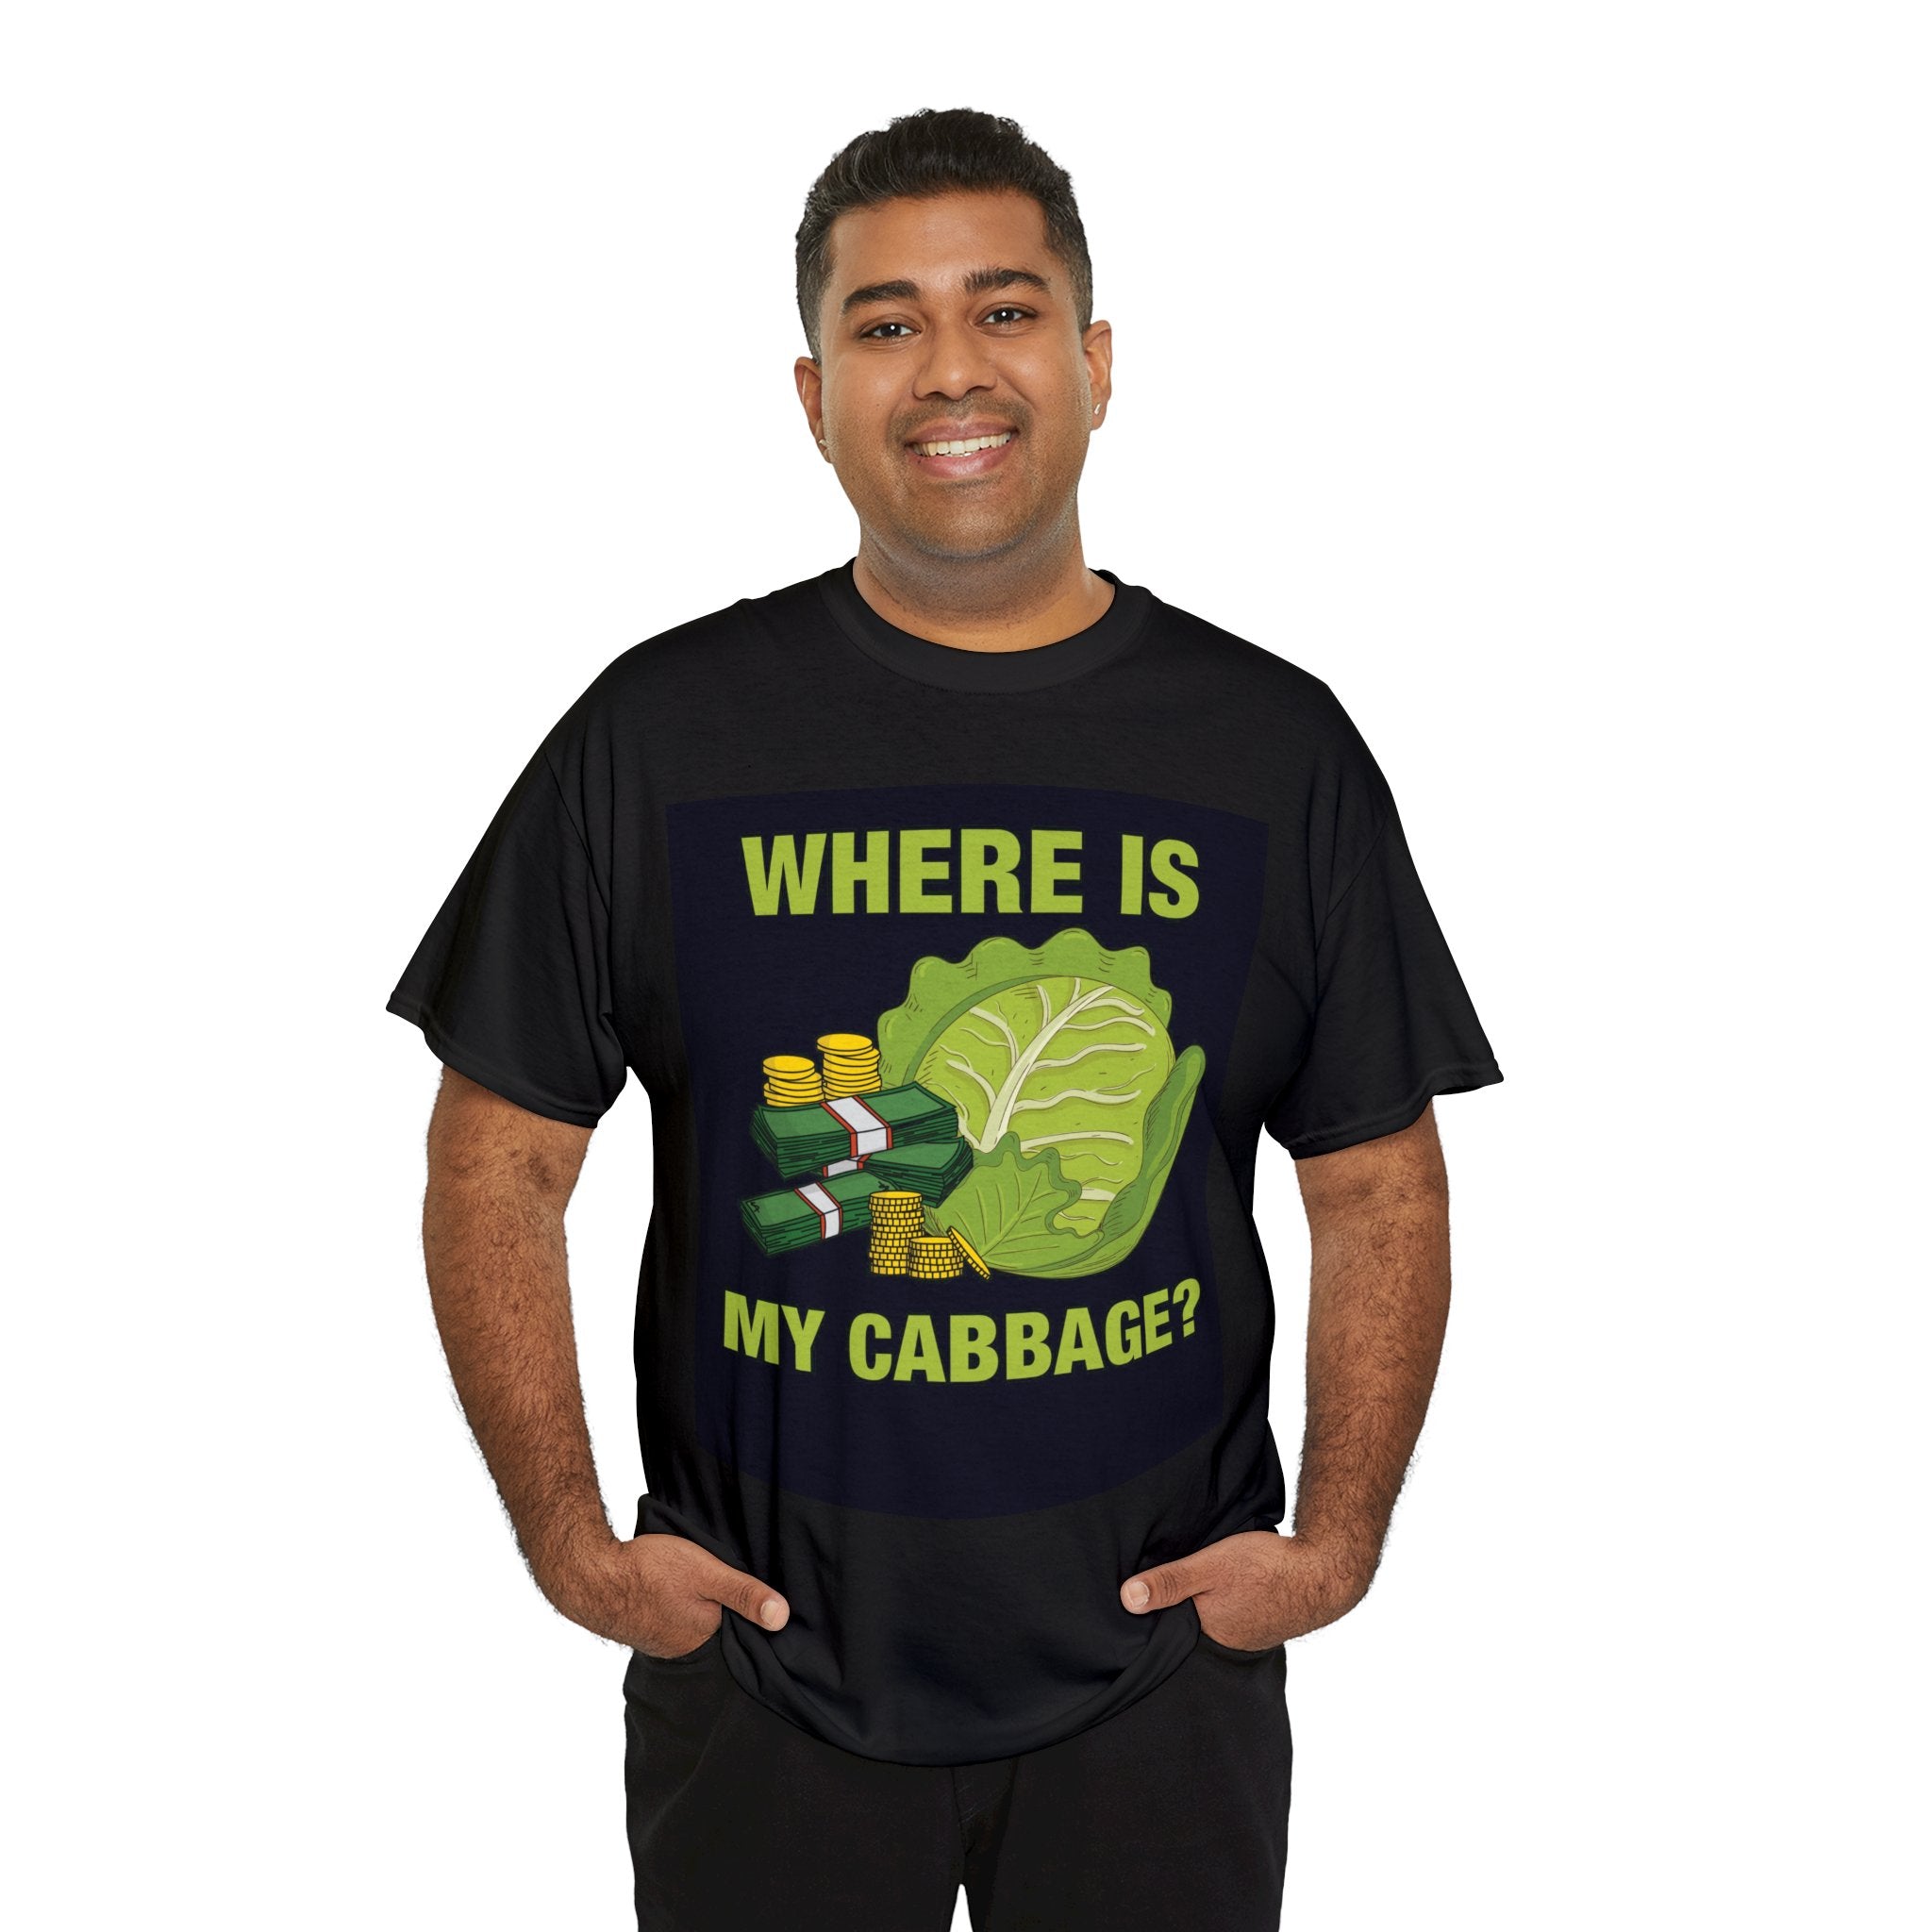 WHERE IS MY CABBAGE? Unisex Tee